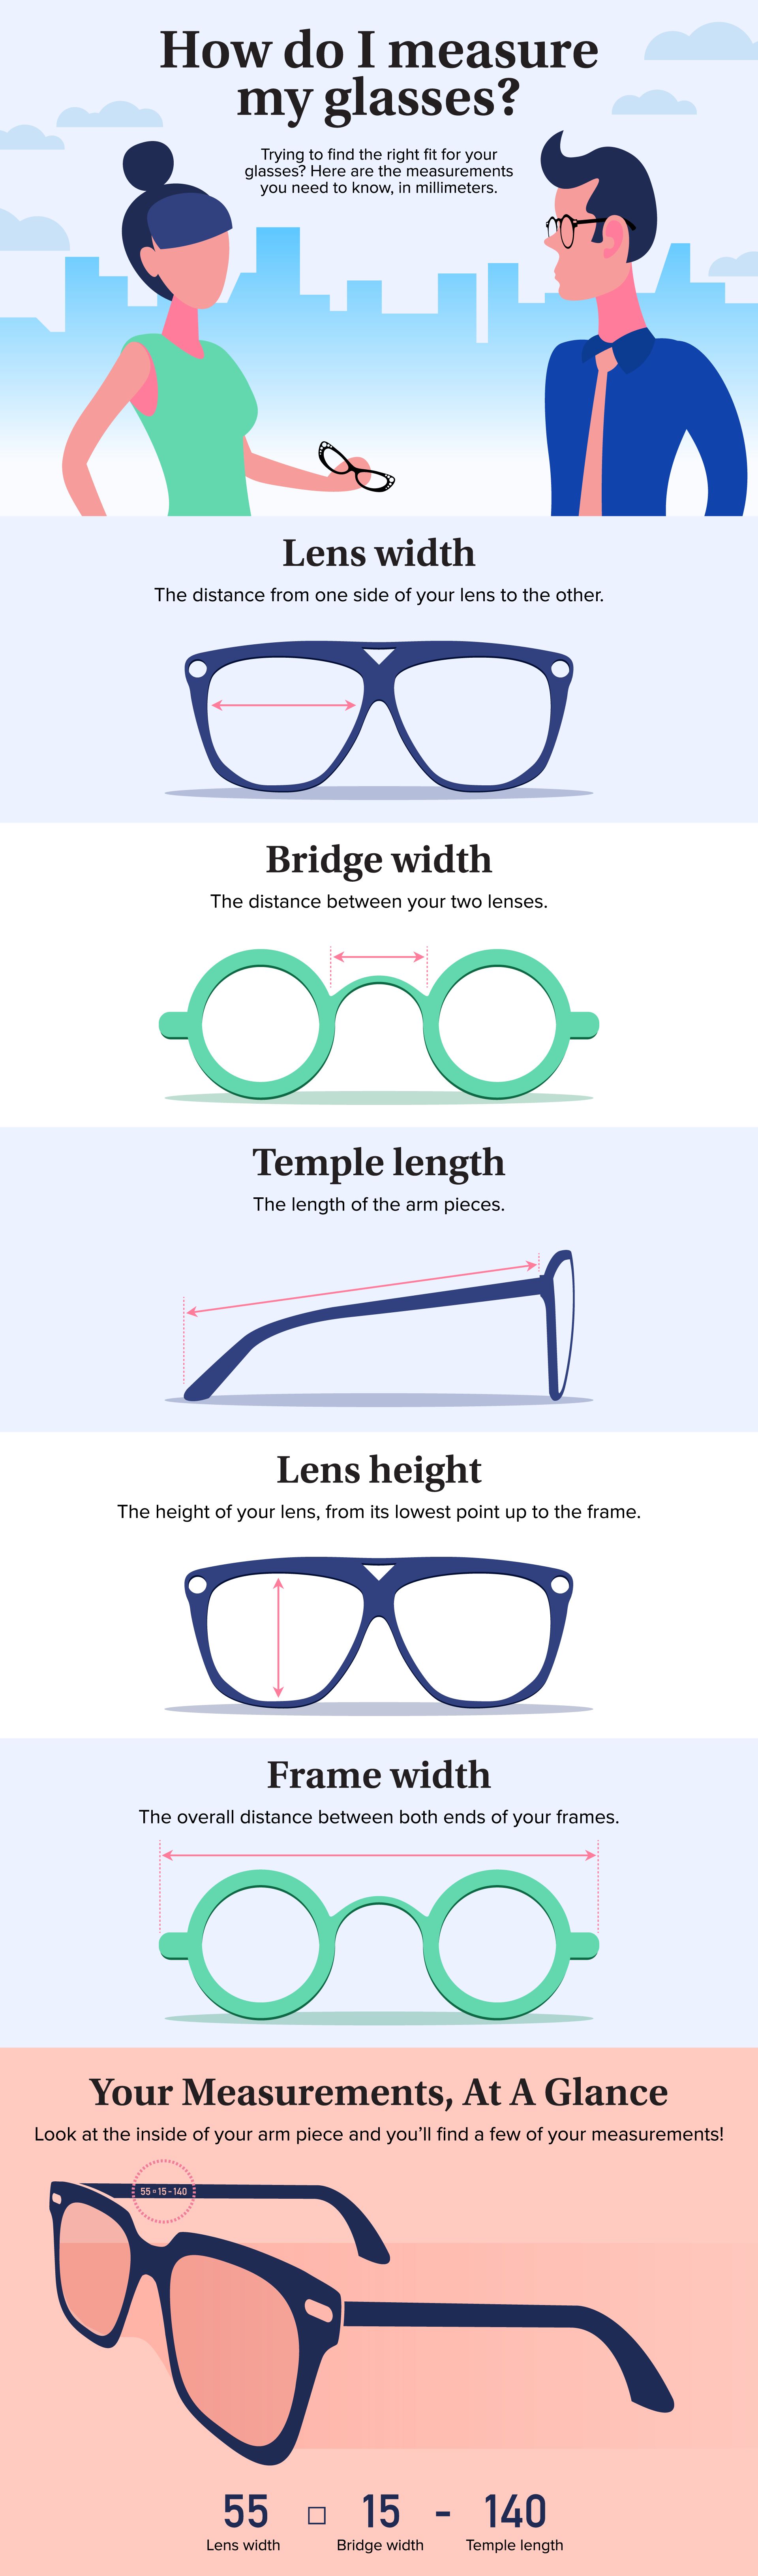 how-do-i-measure-my-eyeglasses-all-about-vision